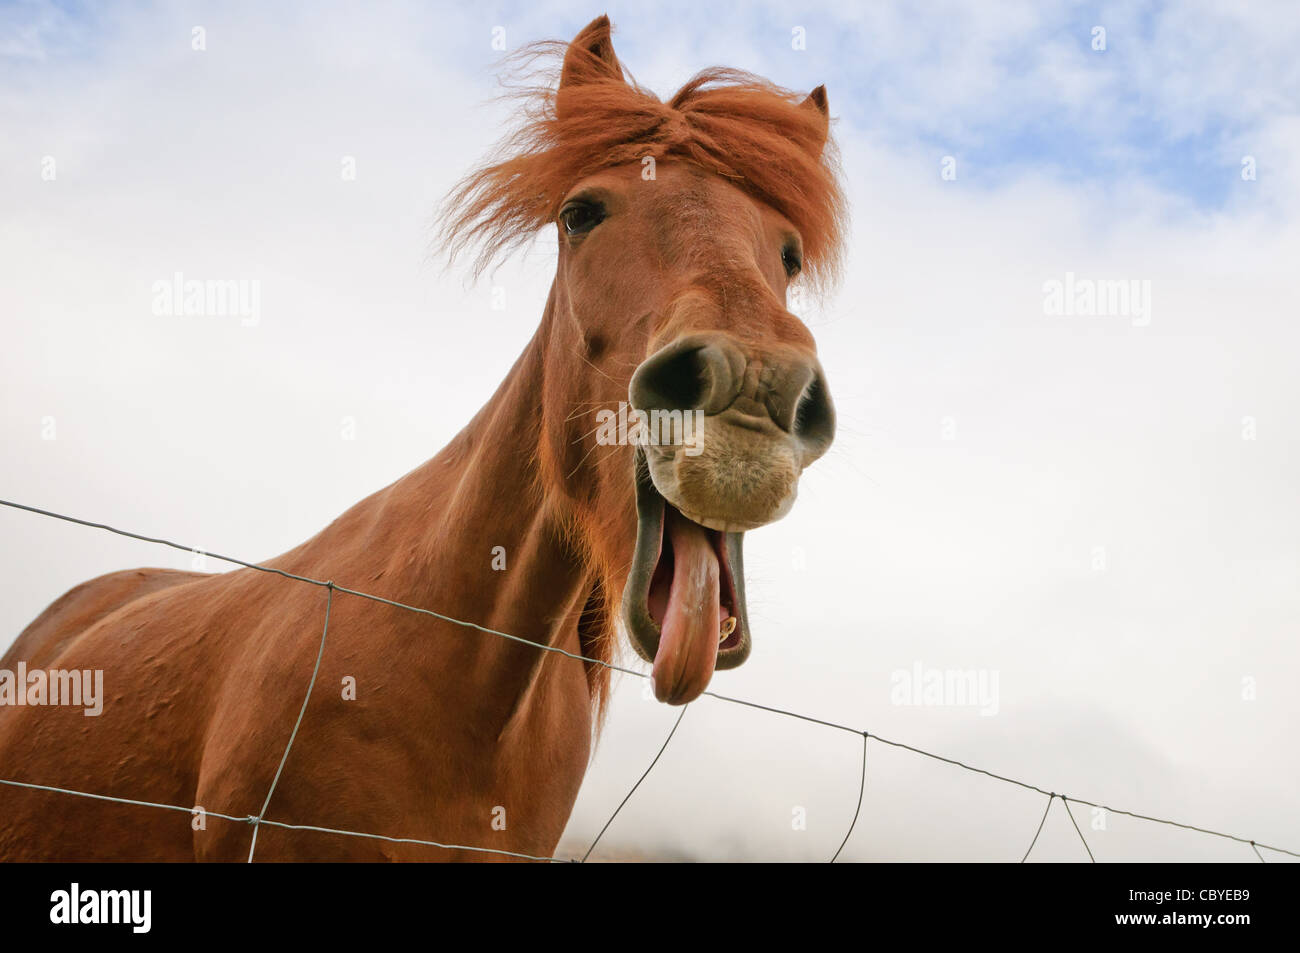 An Icelandic horse makes funny facial expressions. Stock Photo